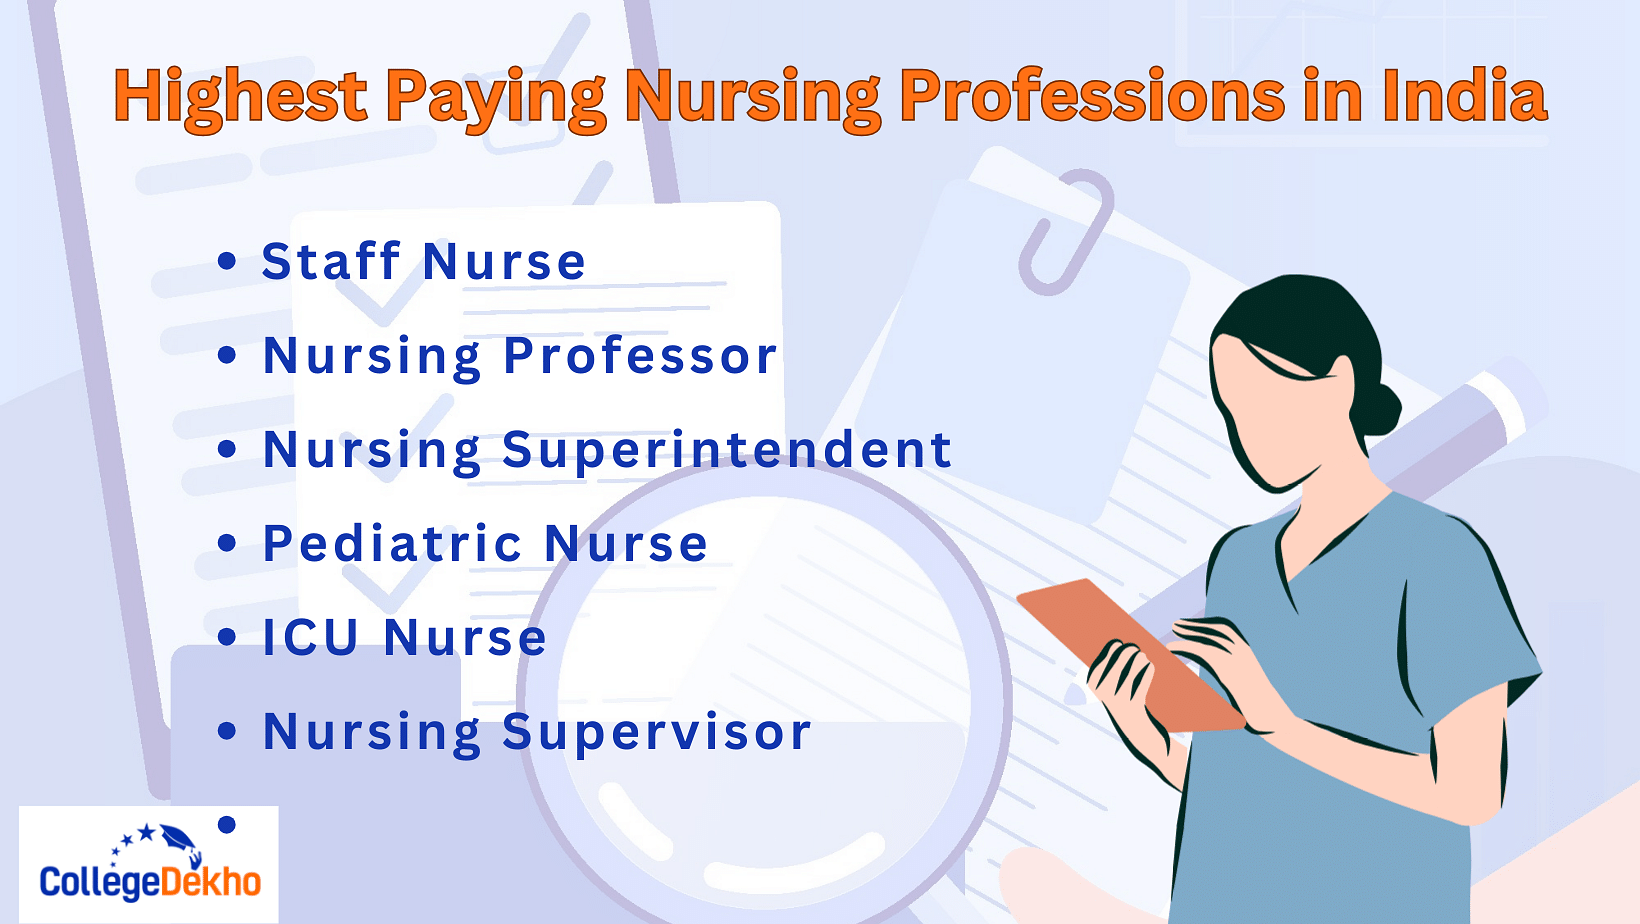 Highest paying Nursing Professions in India